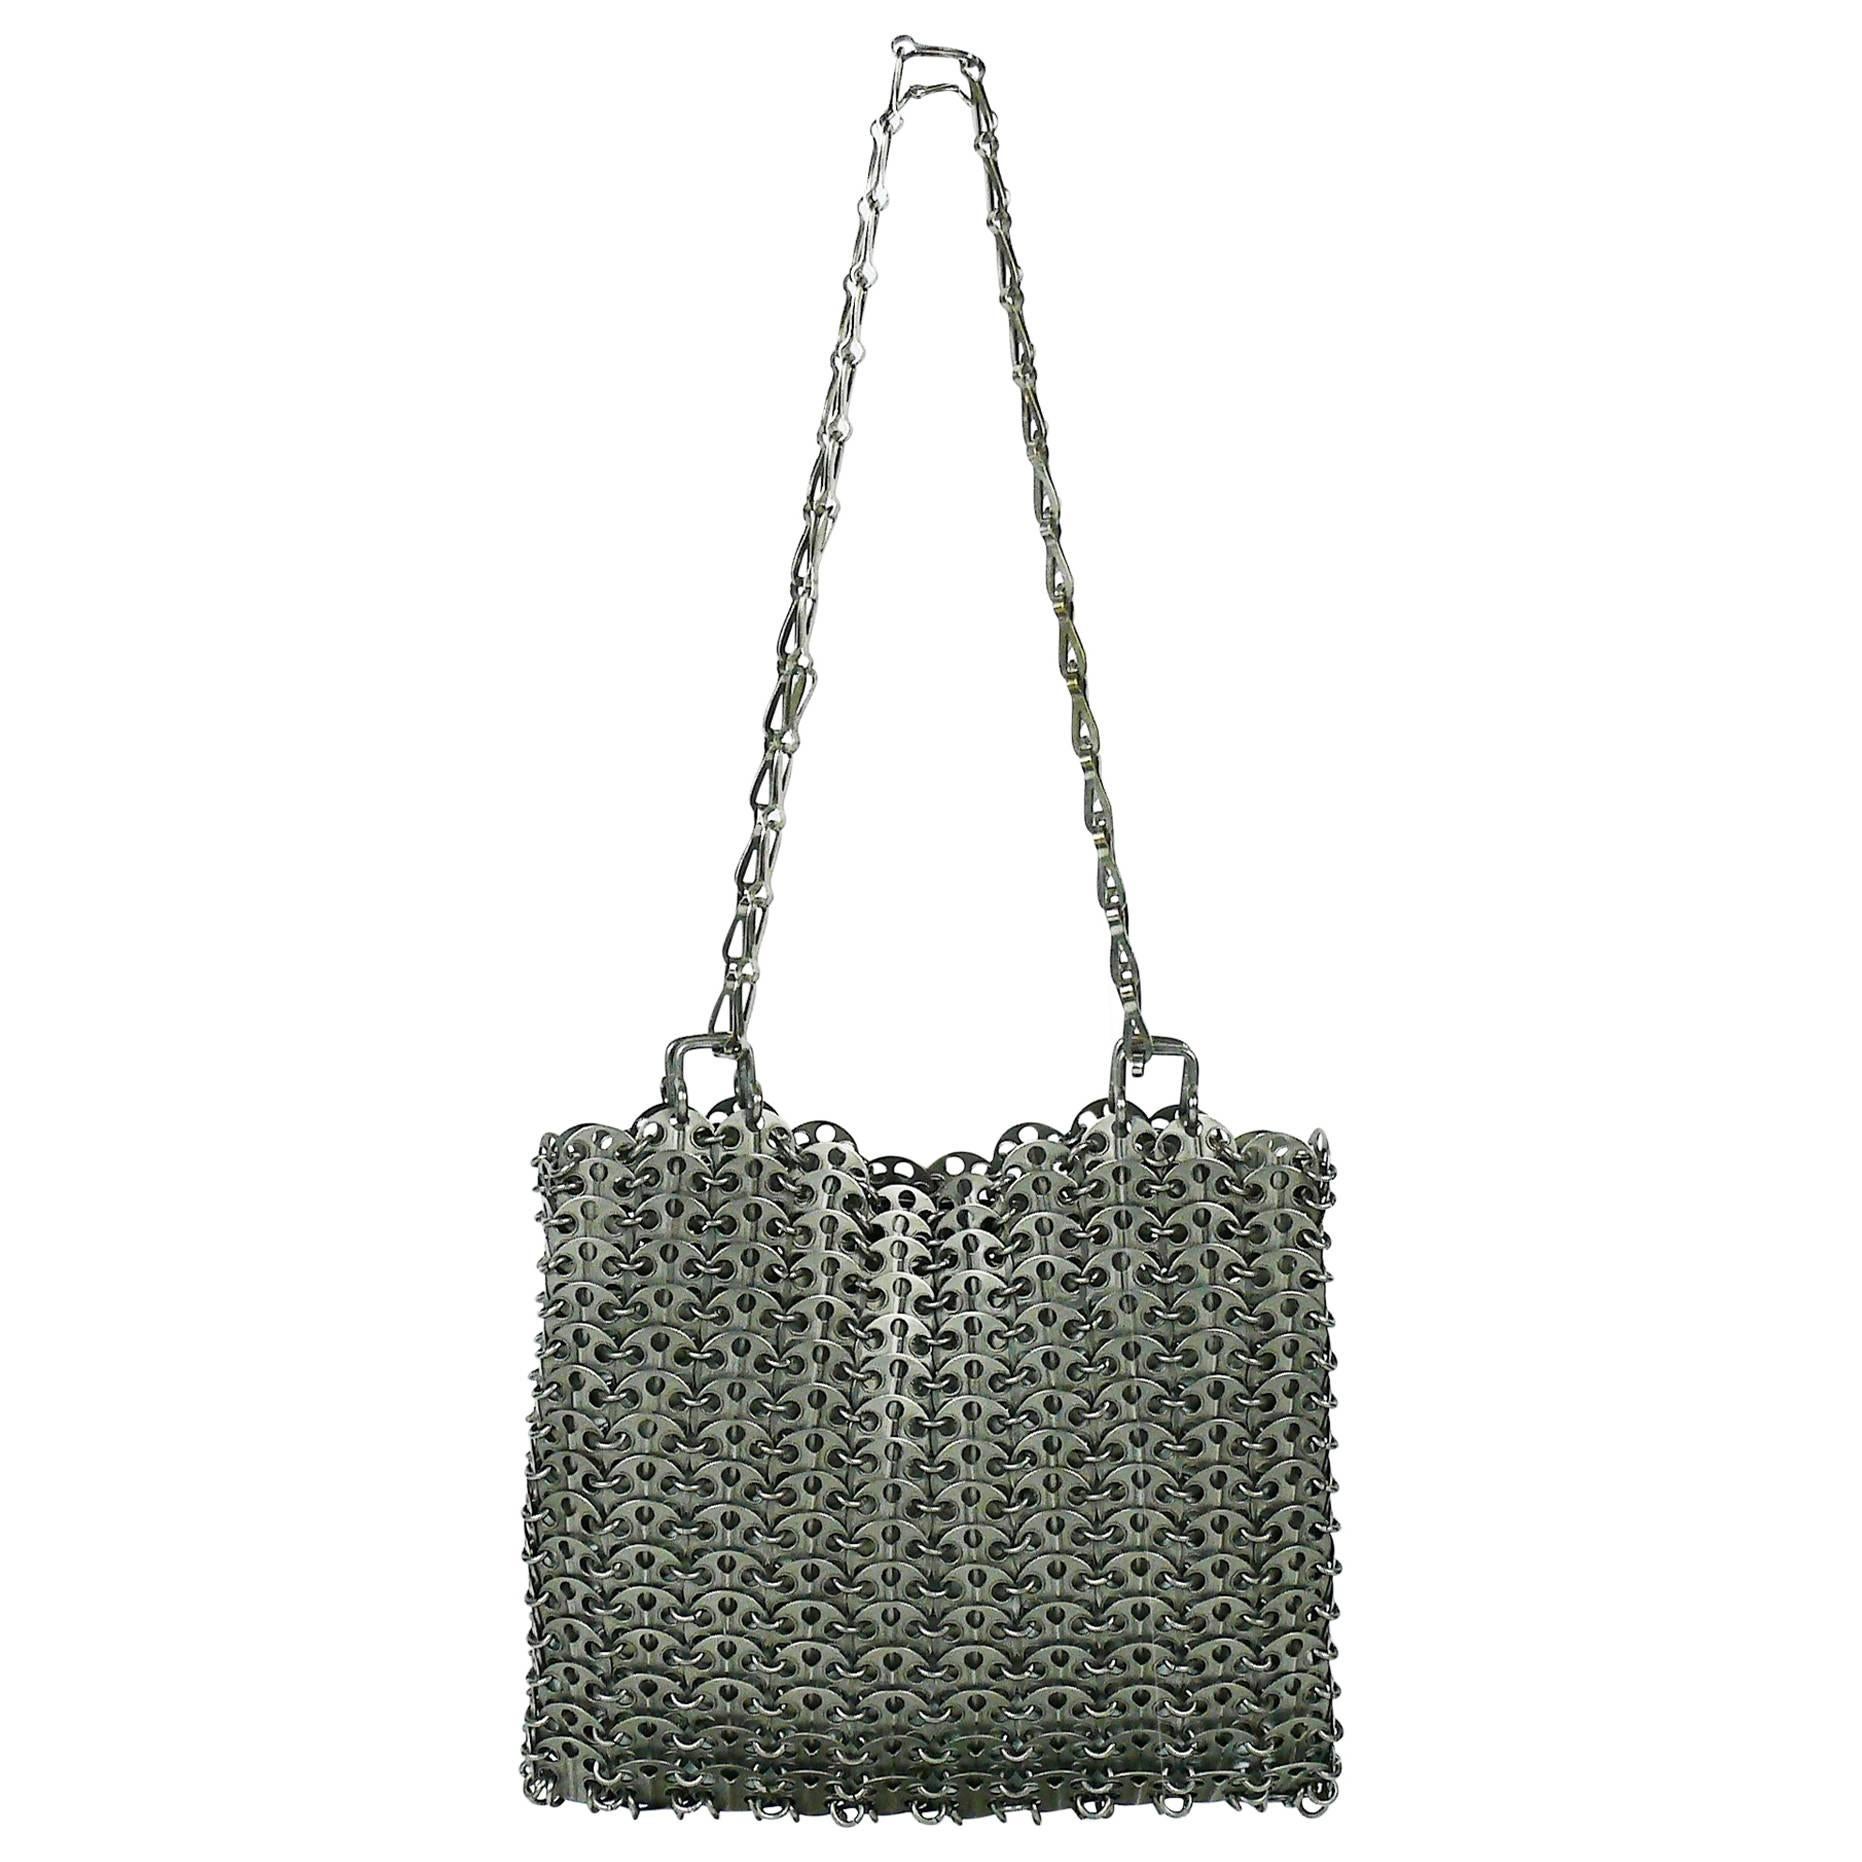 Paco Rabanne Vintage "Le 69" Iconic Metal Chain Mail Bag